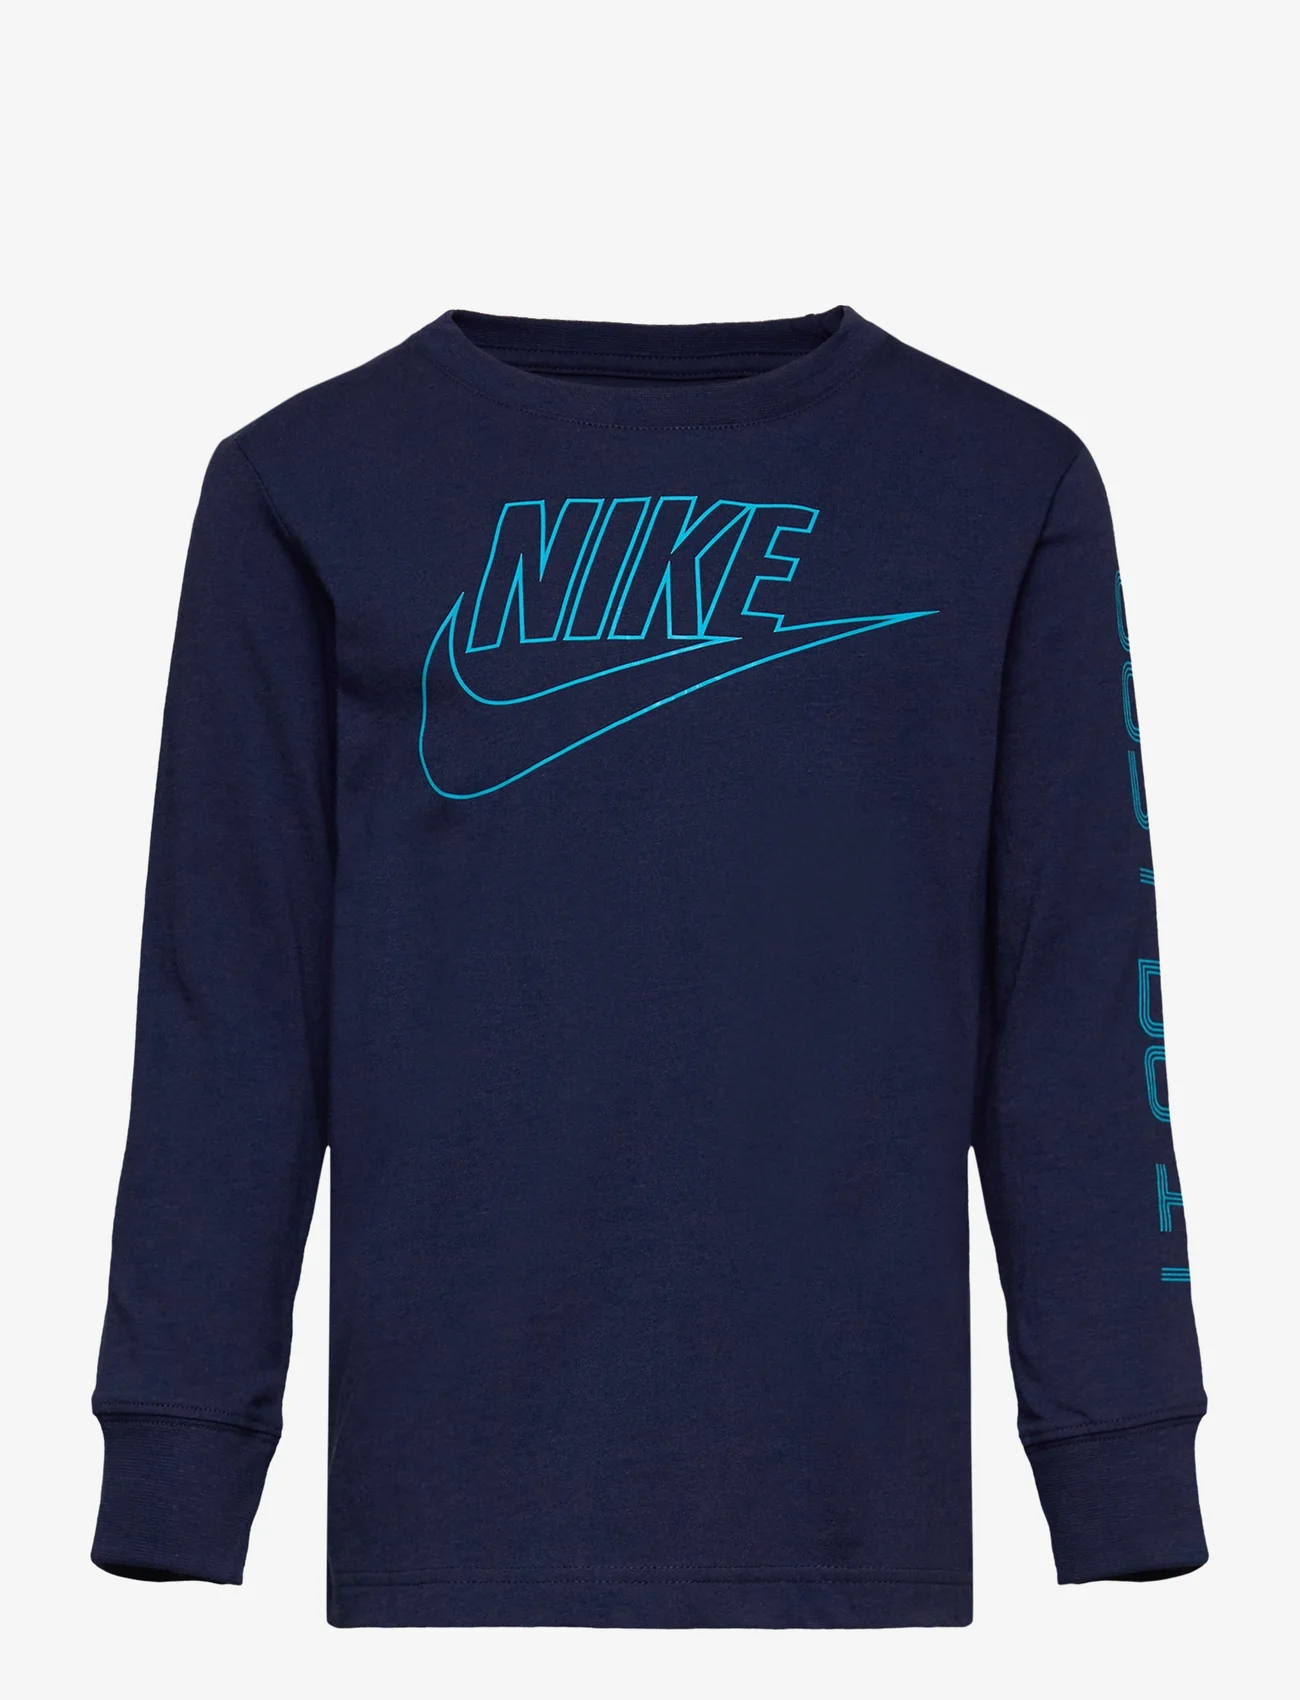 Nike - AMPLFIED LS SLEEVE HIT TEE - long-sleeved t-shirts - midnight navy - 0